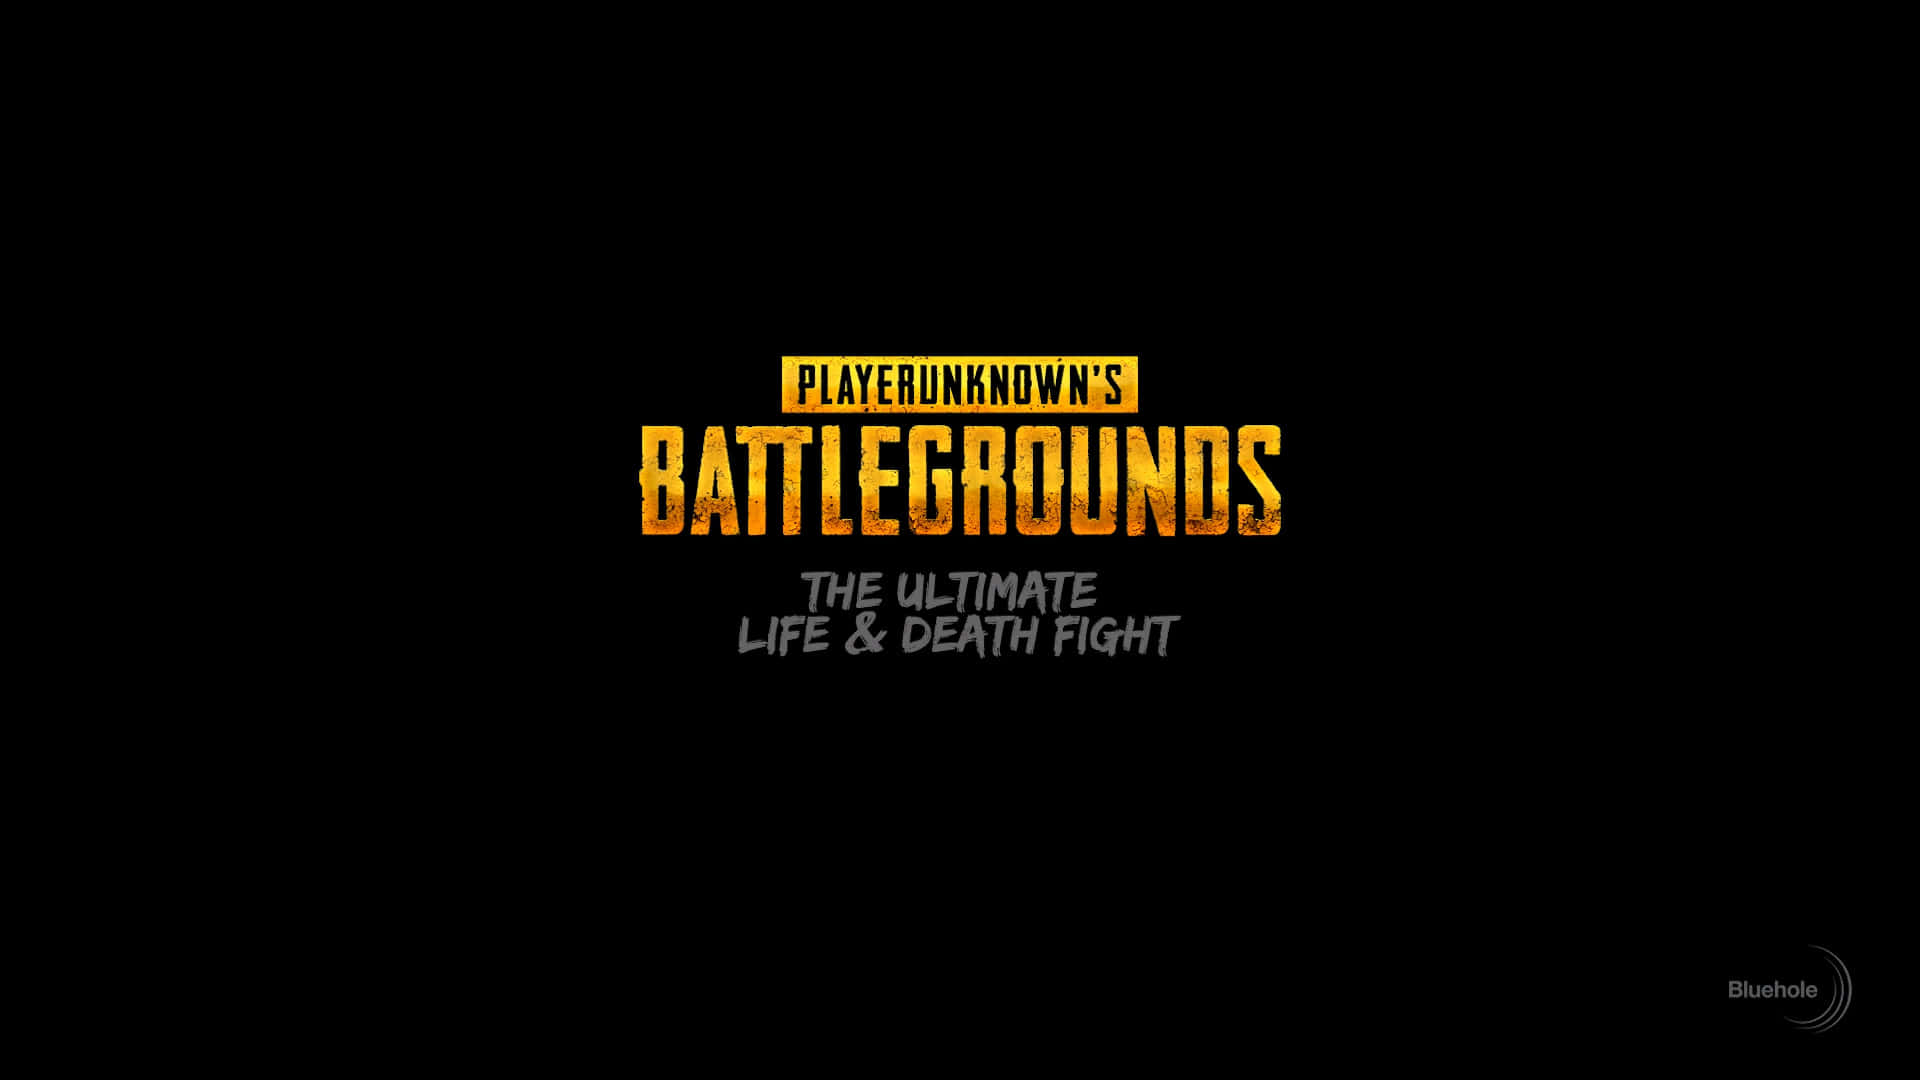 Pubg Battlegrounds - The Ultimate Life And Death Fight